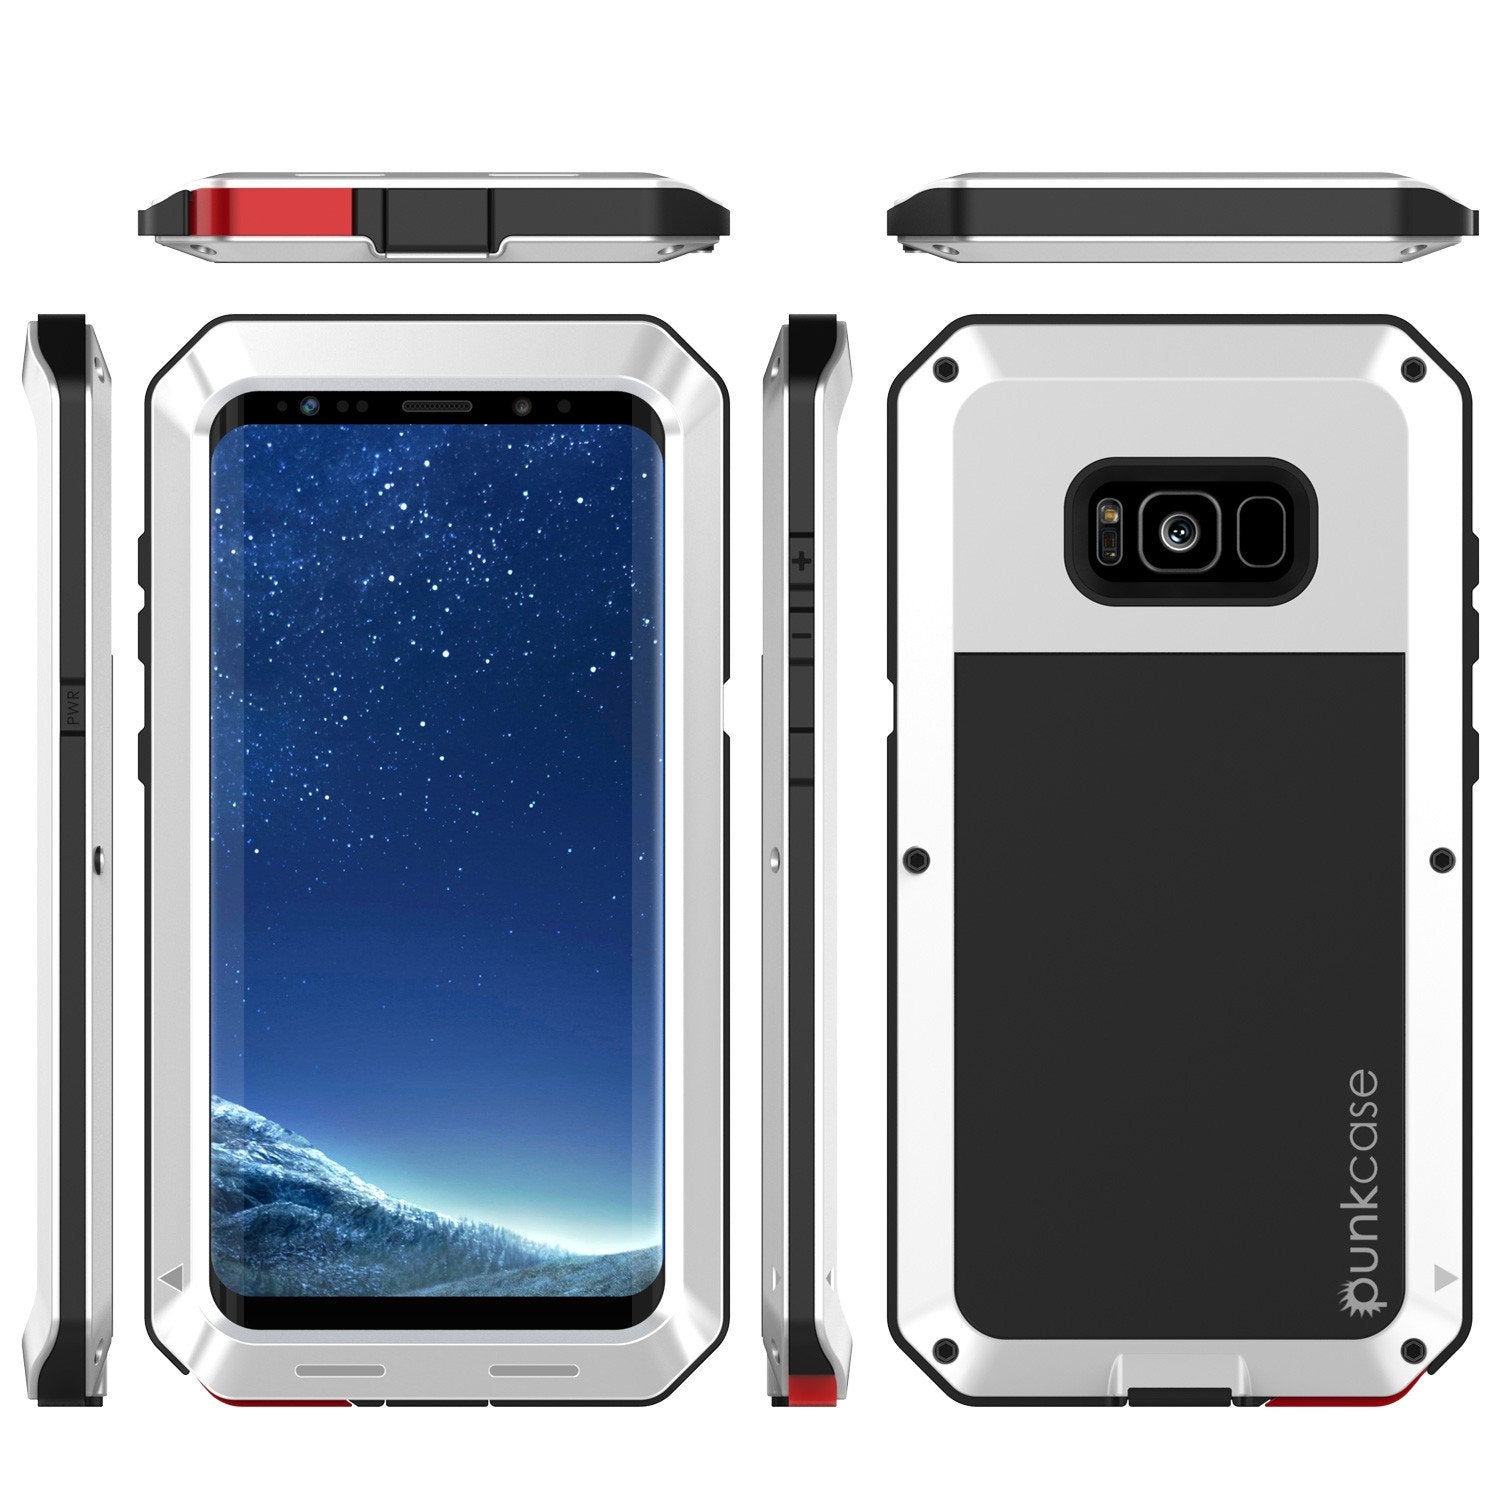 Galaxy S8 Metal Case, Heavy Duty Military Grade Rugged Armor Cover [shock proof] W/ Prime Drop Protection [WHITE]